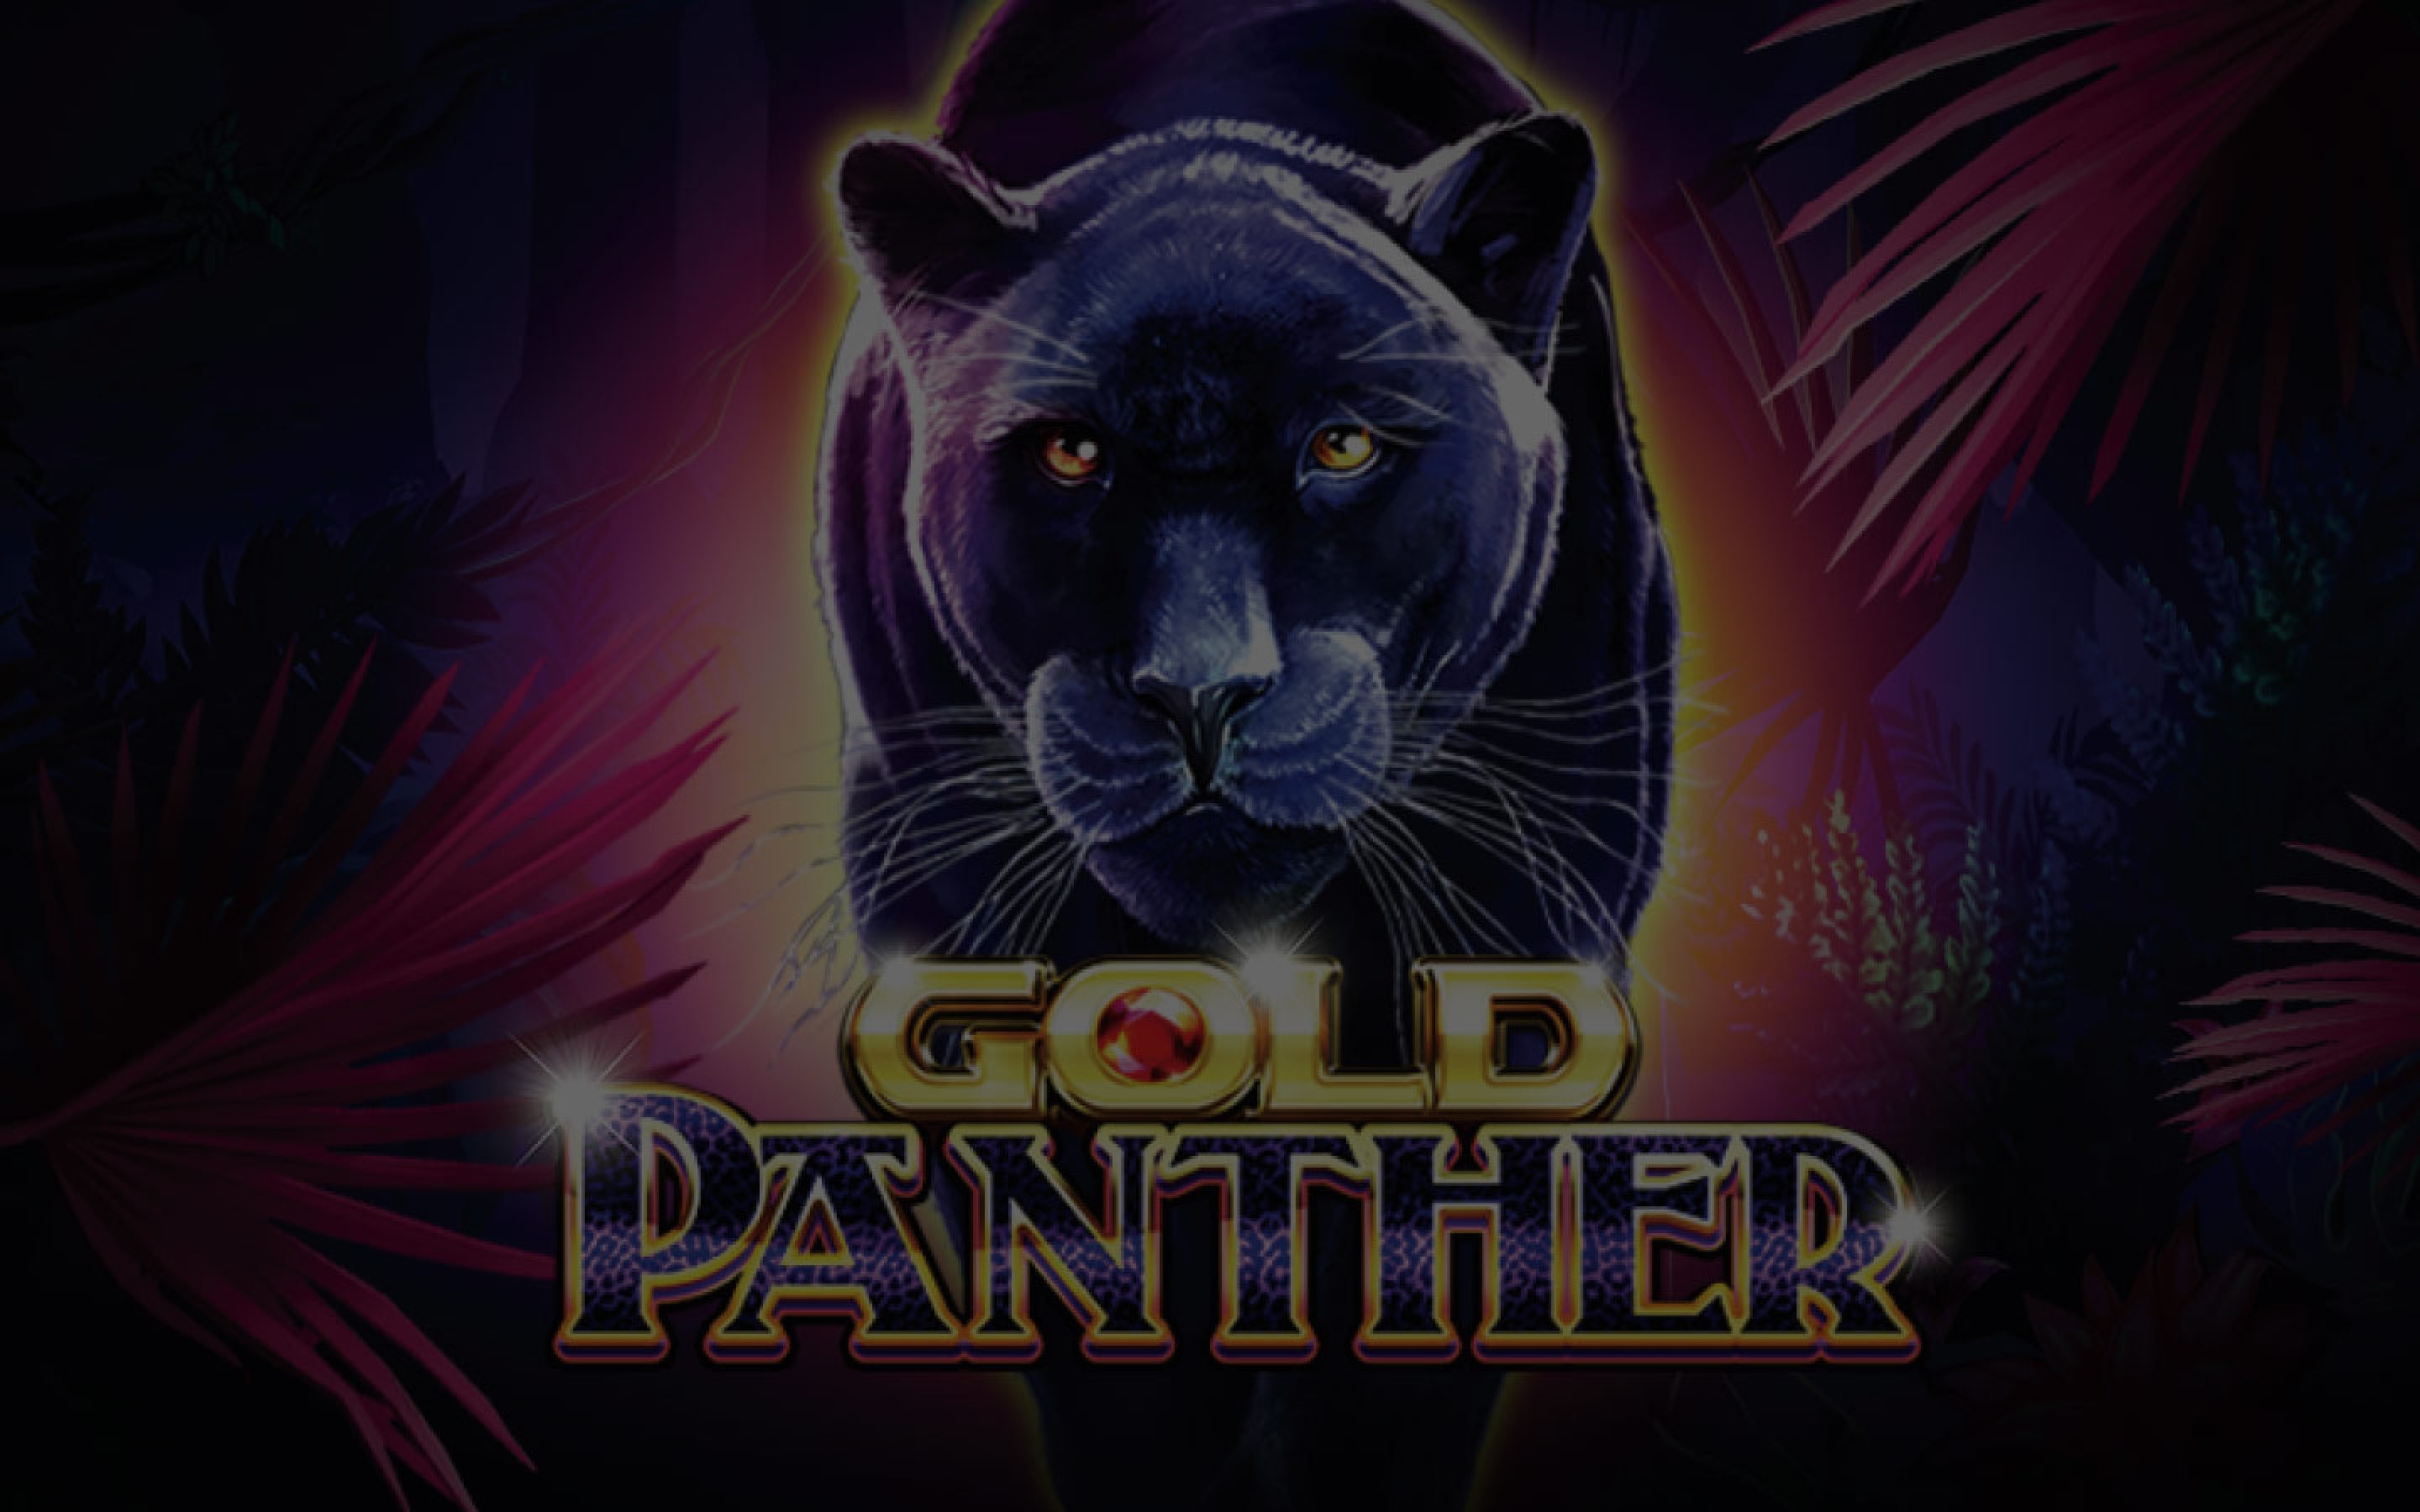 Gold Panther demo